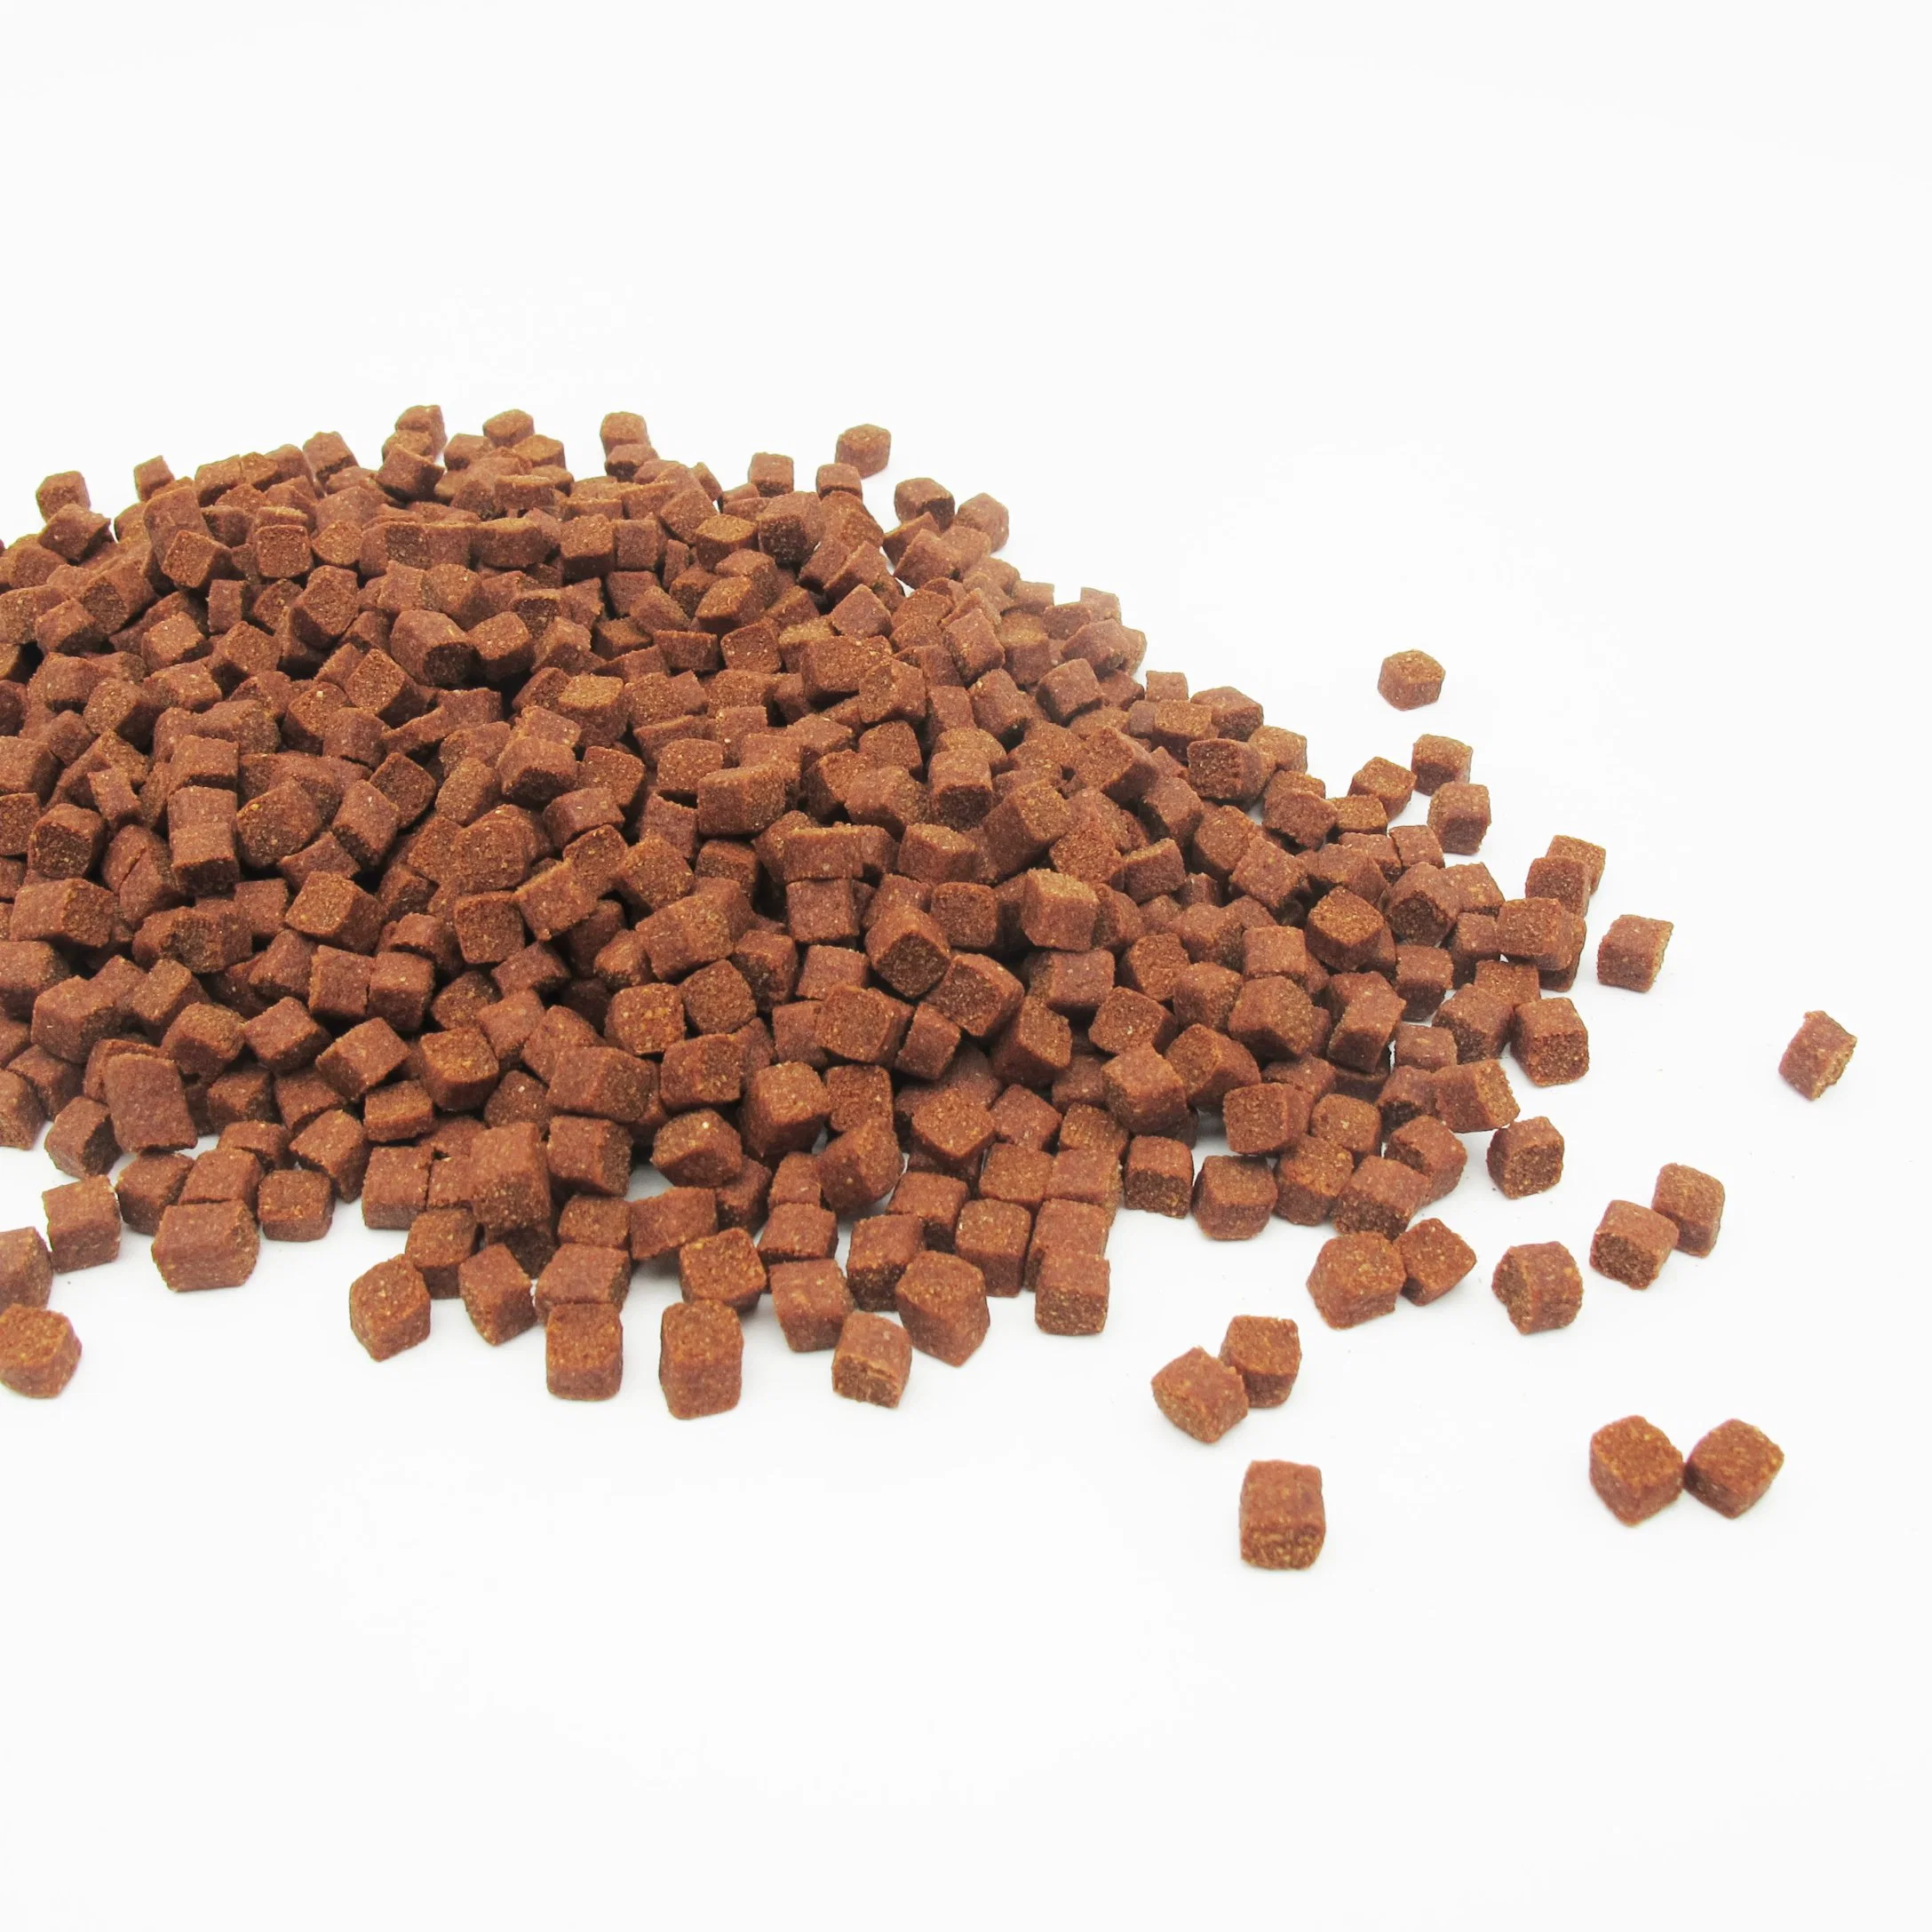 100% Natural Real Meat Dog Snack Cat Treat Dry Beef Millet Granules Dry Pet Food